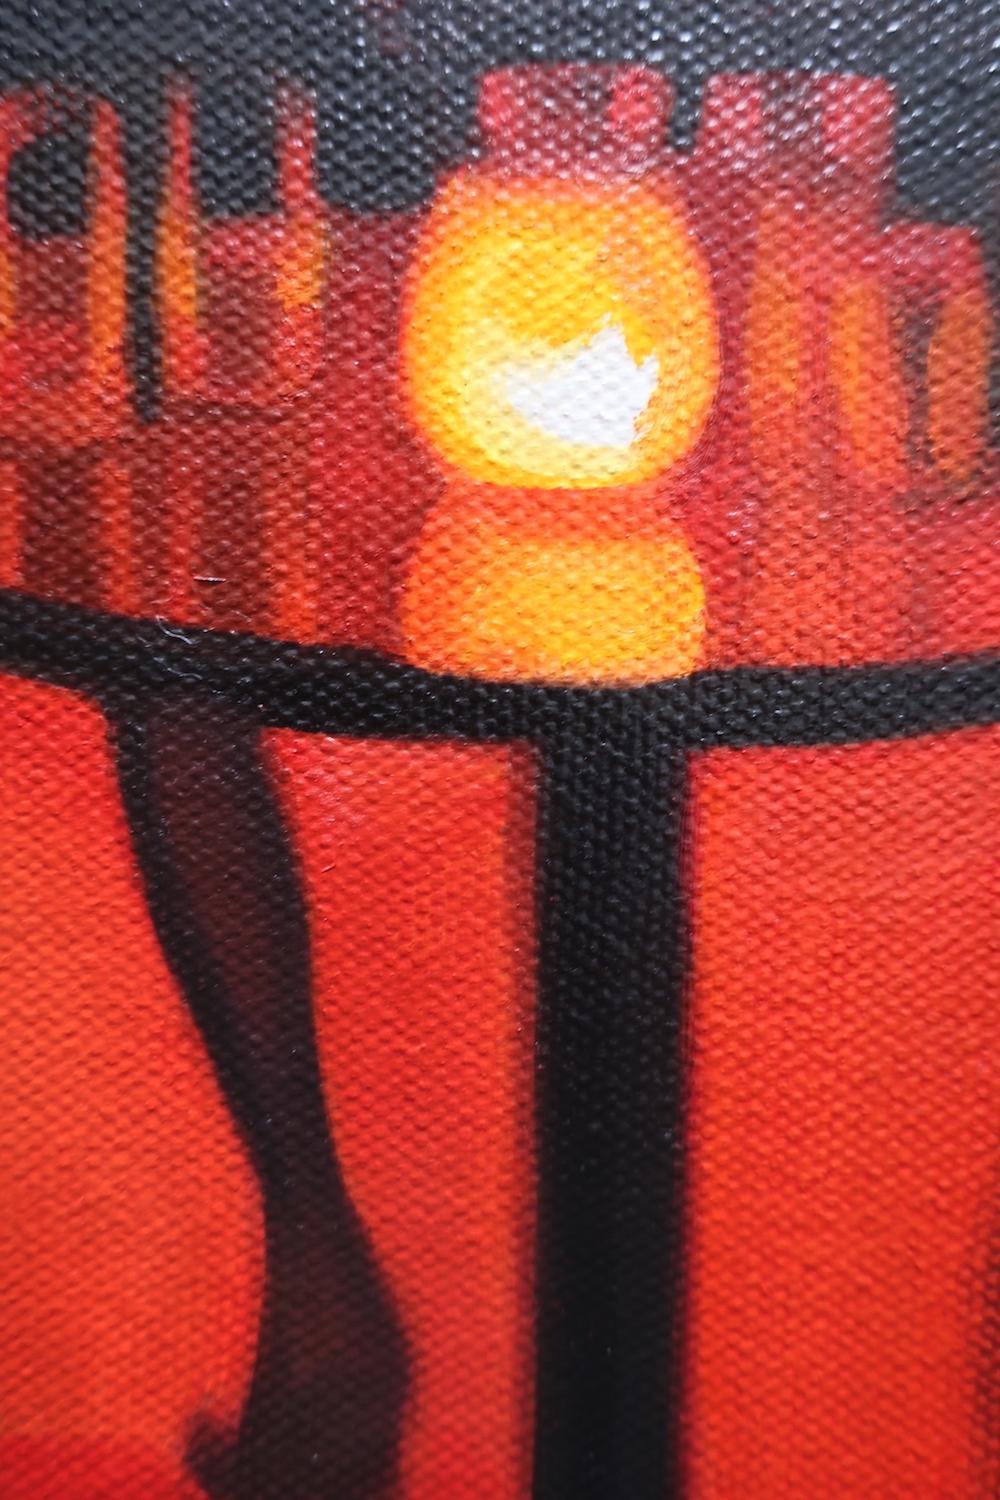 <p>Artist Comments<br />Enjoying live music at the MakeOut Room in San Francisco, I found this view of the dancers' legs, mirror ball beams on the floor, and candles on the tables classic and captivating. The painting is on gallery wrapped canvas